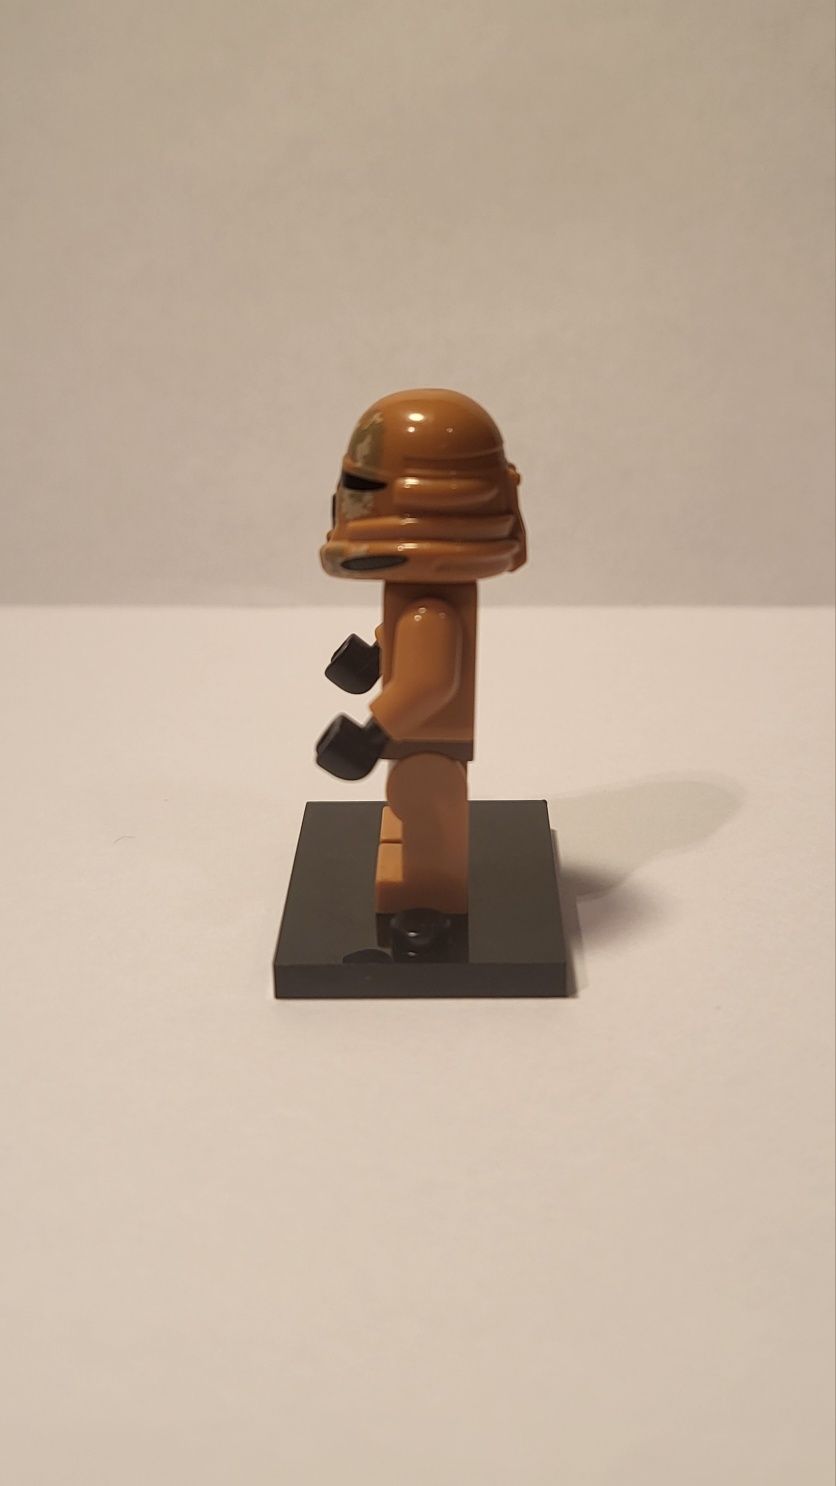 Clone Trooper (Phase 1) - Geonosis Camouflage, Scowl 75089